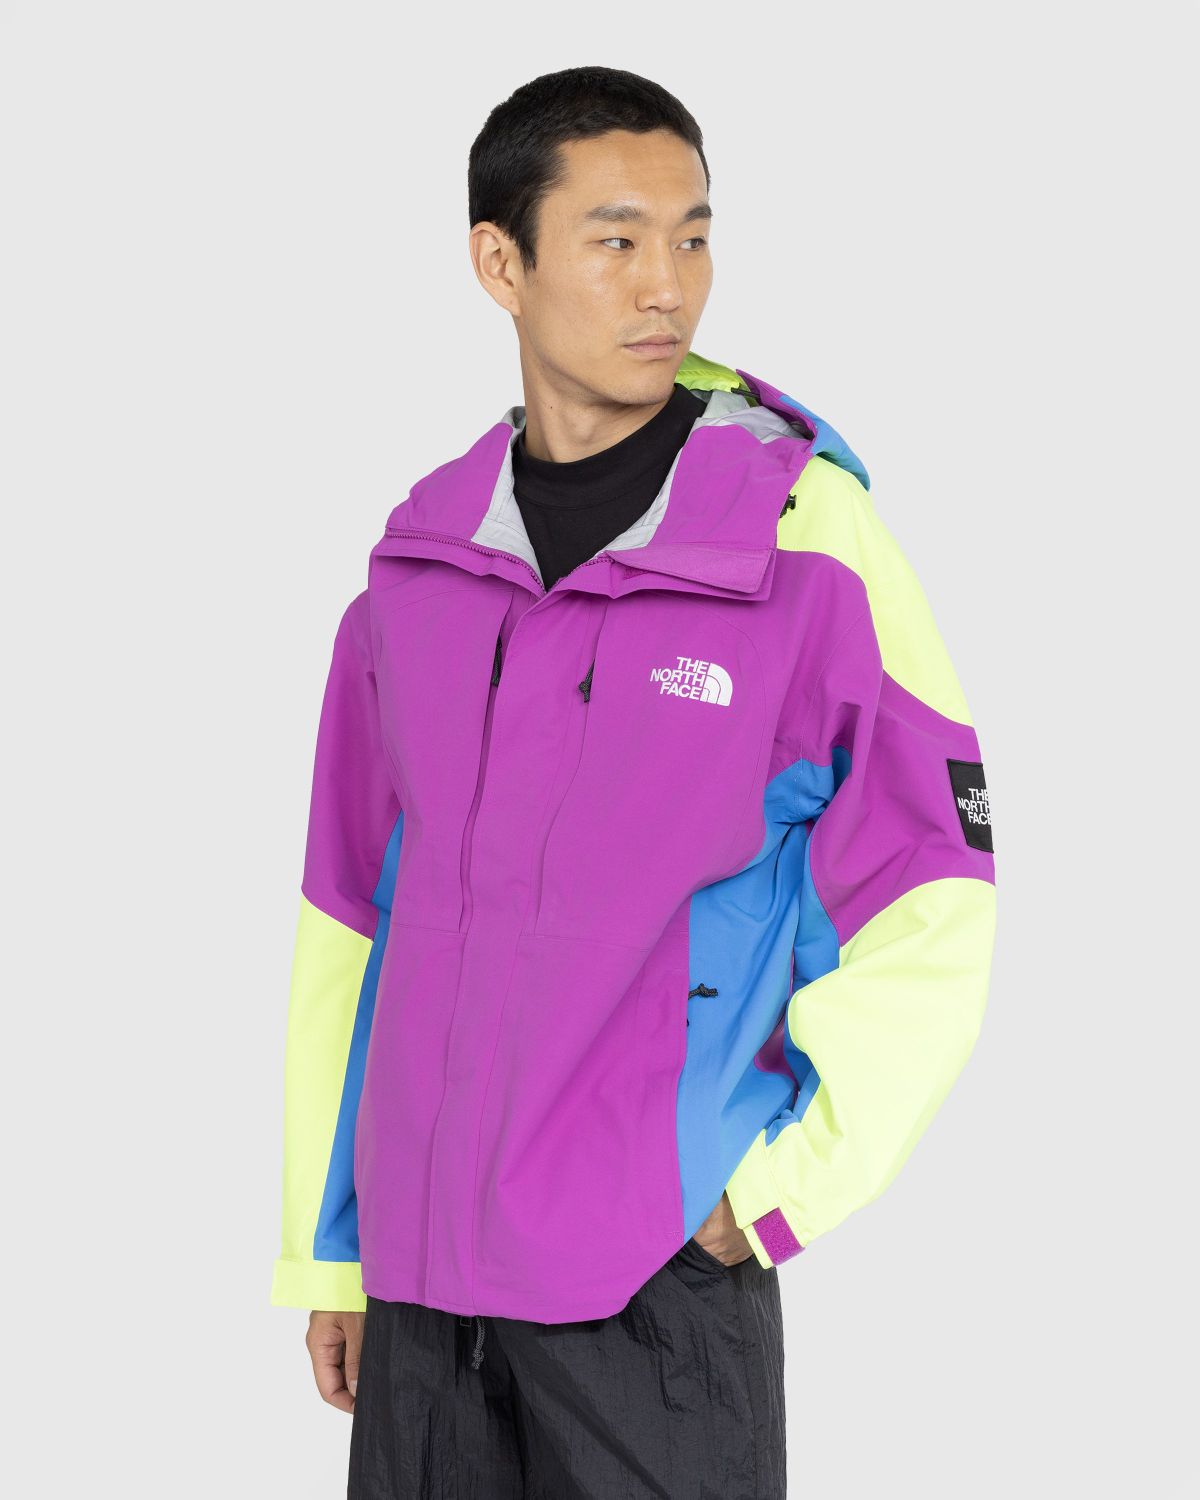 The North Face – 3L DryVent Carduelis Jacket Purple Cactus Flower/LED Yellow/Super Sonic Blue - Outerwear - Multi - Image 2